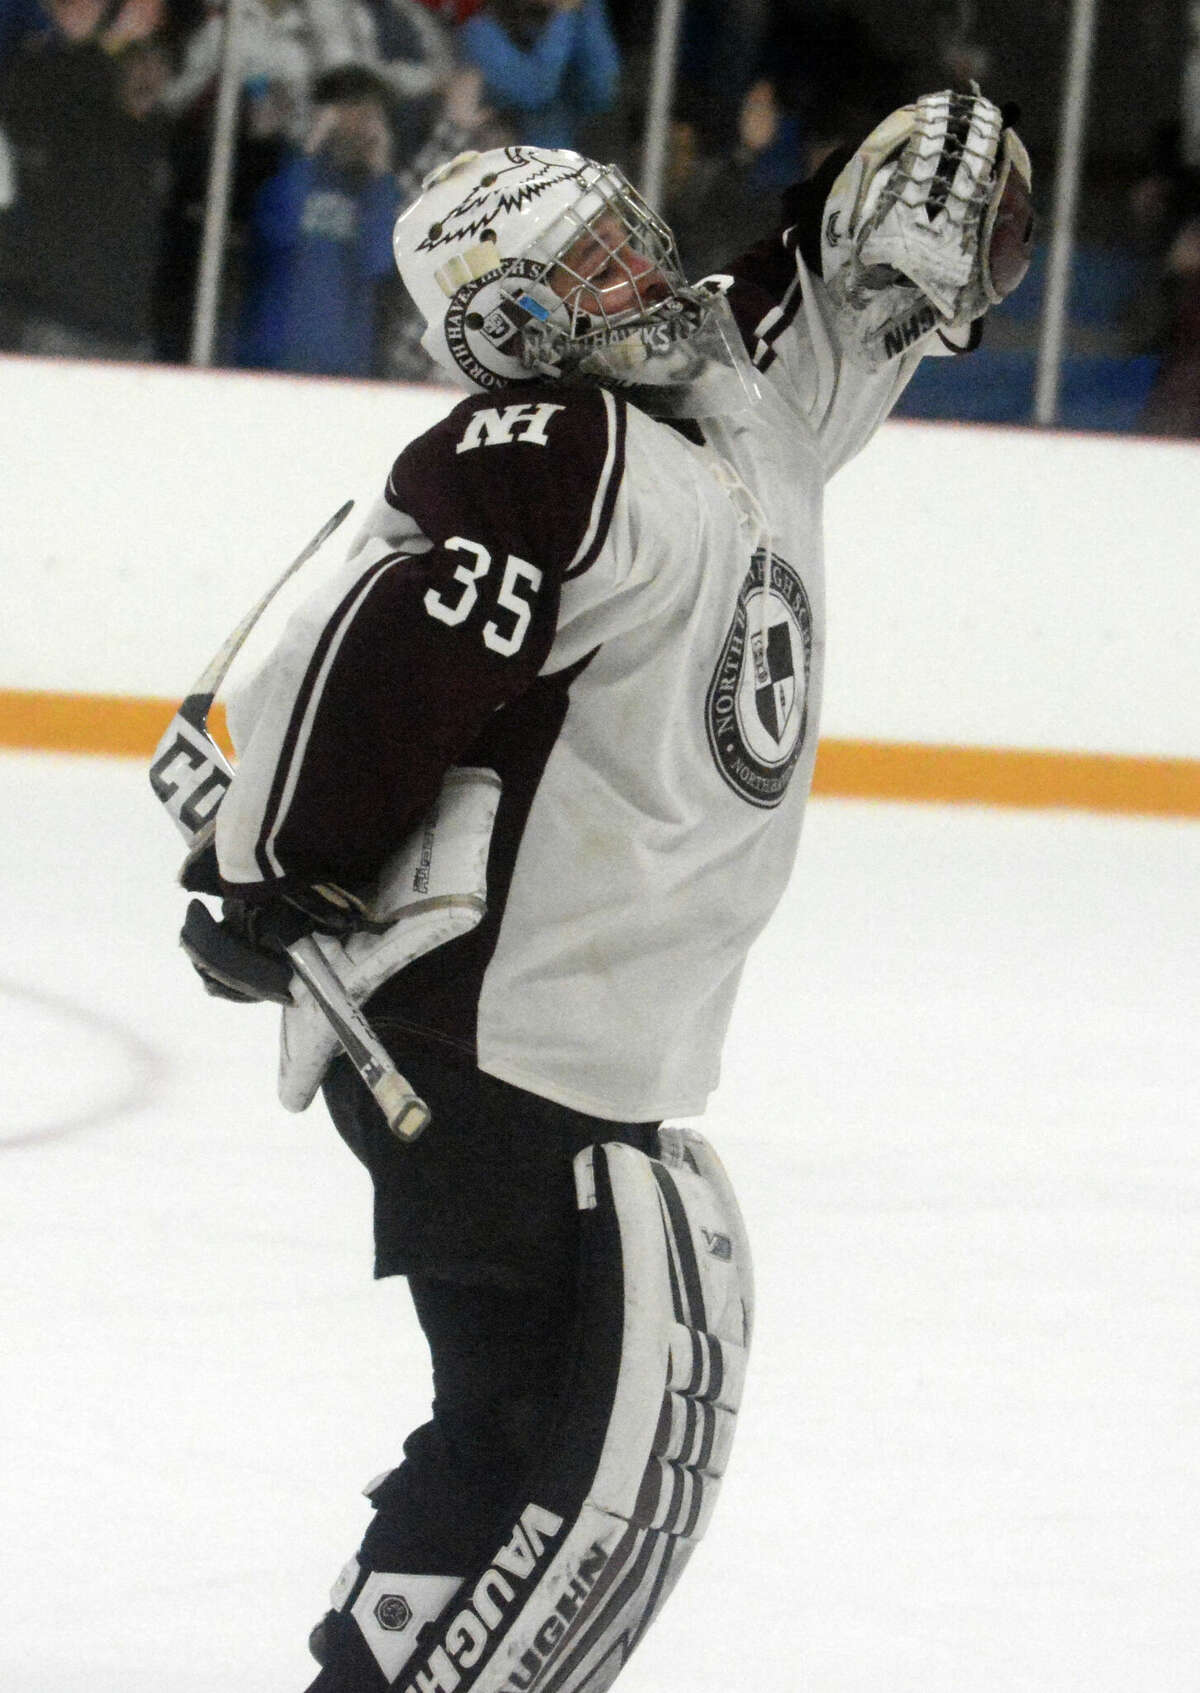 North Haven goaltender Bryce Petersen celebrates after the horn sounded during Friday's SCC-SWC Division 2 championship game at Bennett Rink.